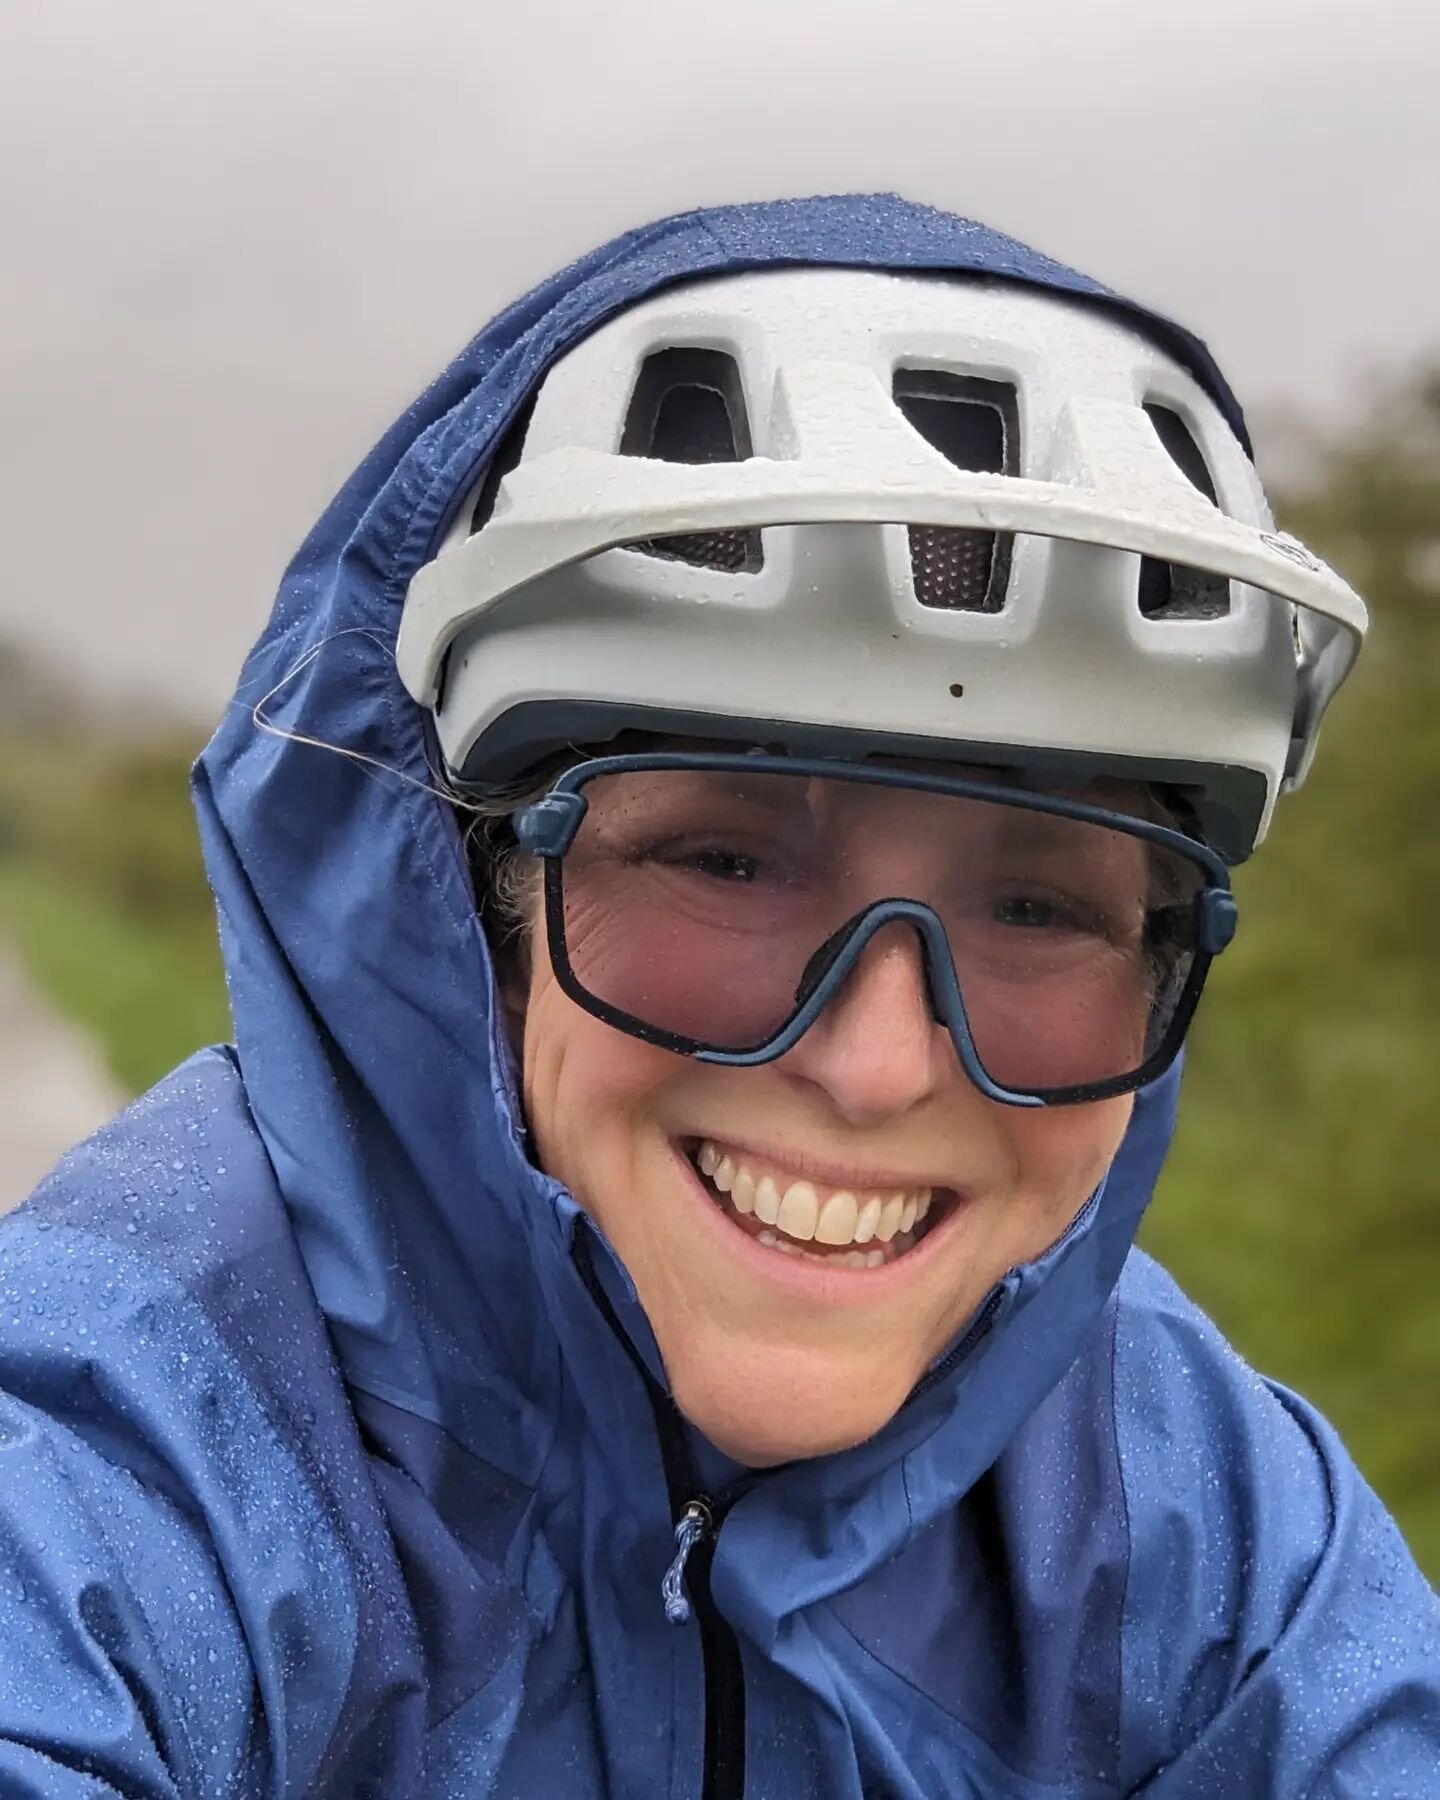 🌧️💦 After getting soaked to the bone the other week, I invested in some @patagonia waterproofs - I can confirm they're worth every penny! #notanad.

🧥 they fit well (top and bottom) 
💧they are properly breathable (no boil in the bag condensation)